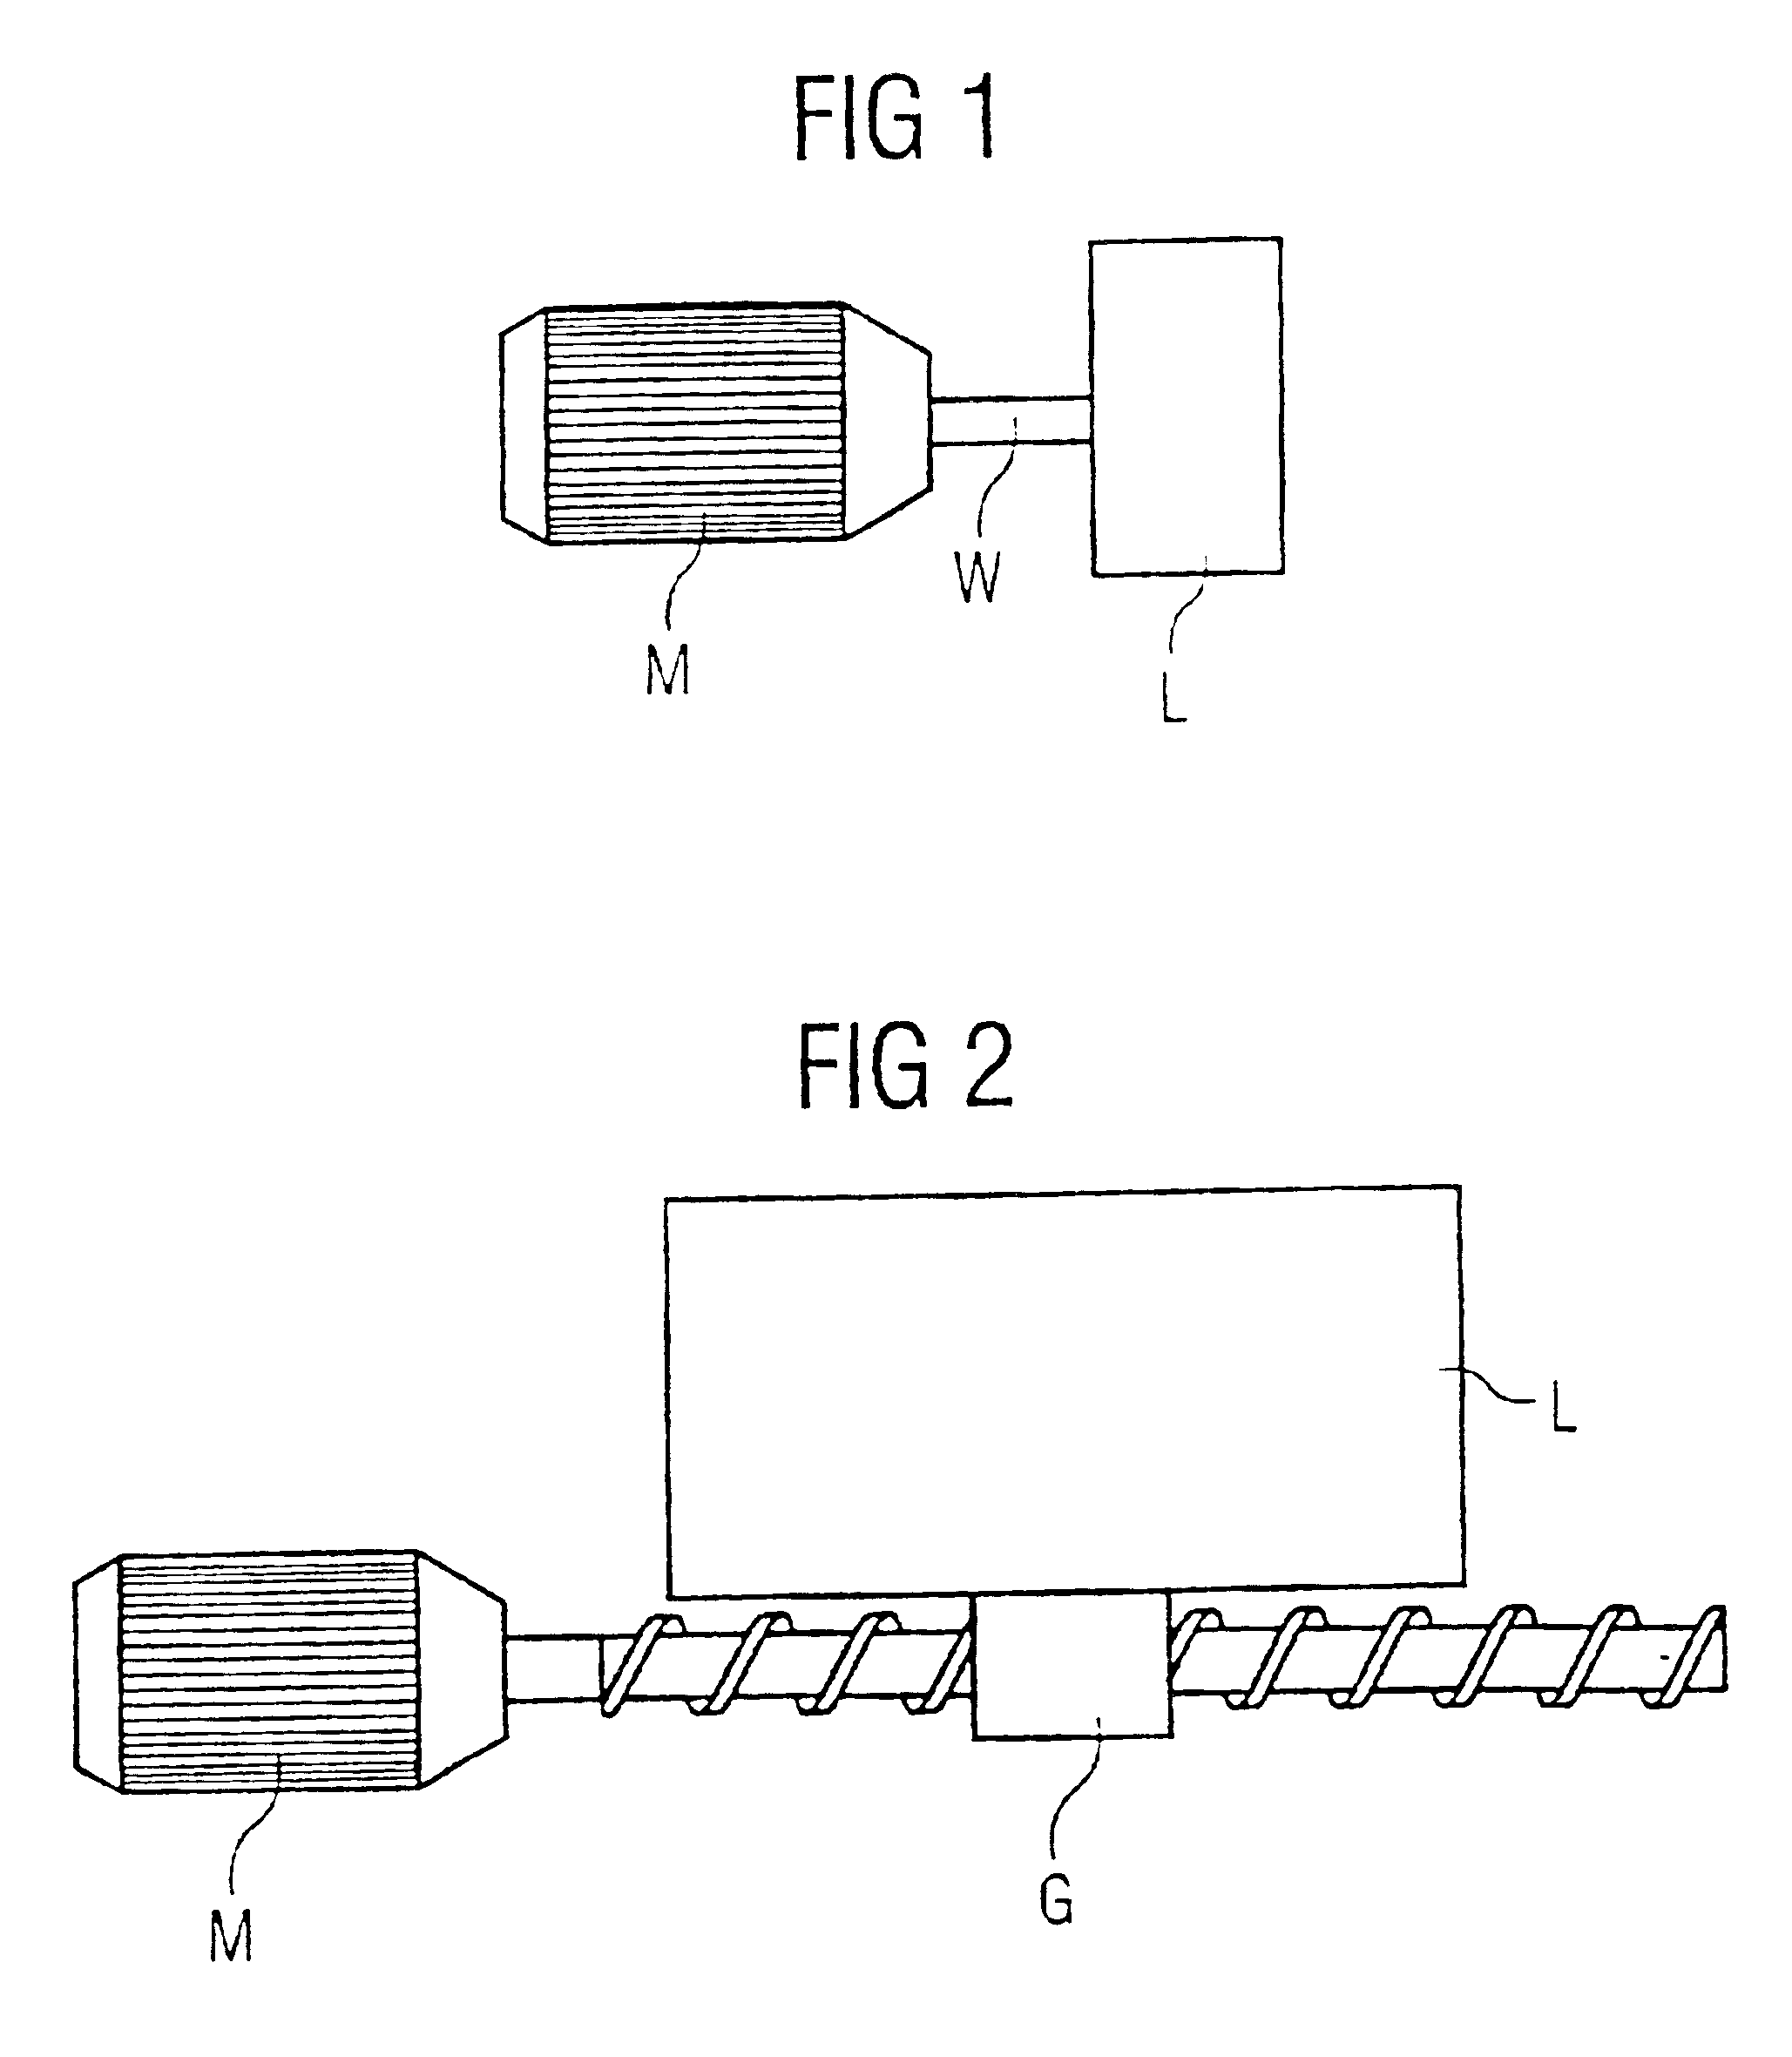 Method and control structure for damping low-frequency load oscillations in drives with a motor and load